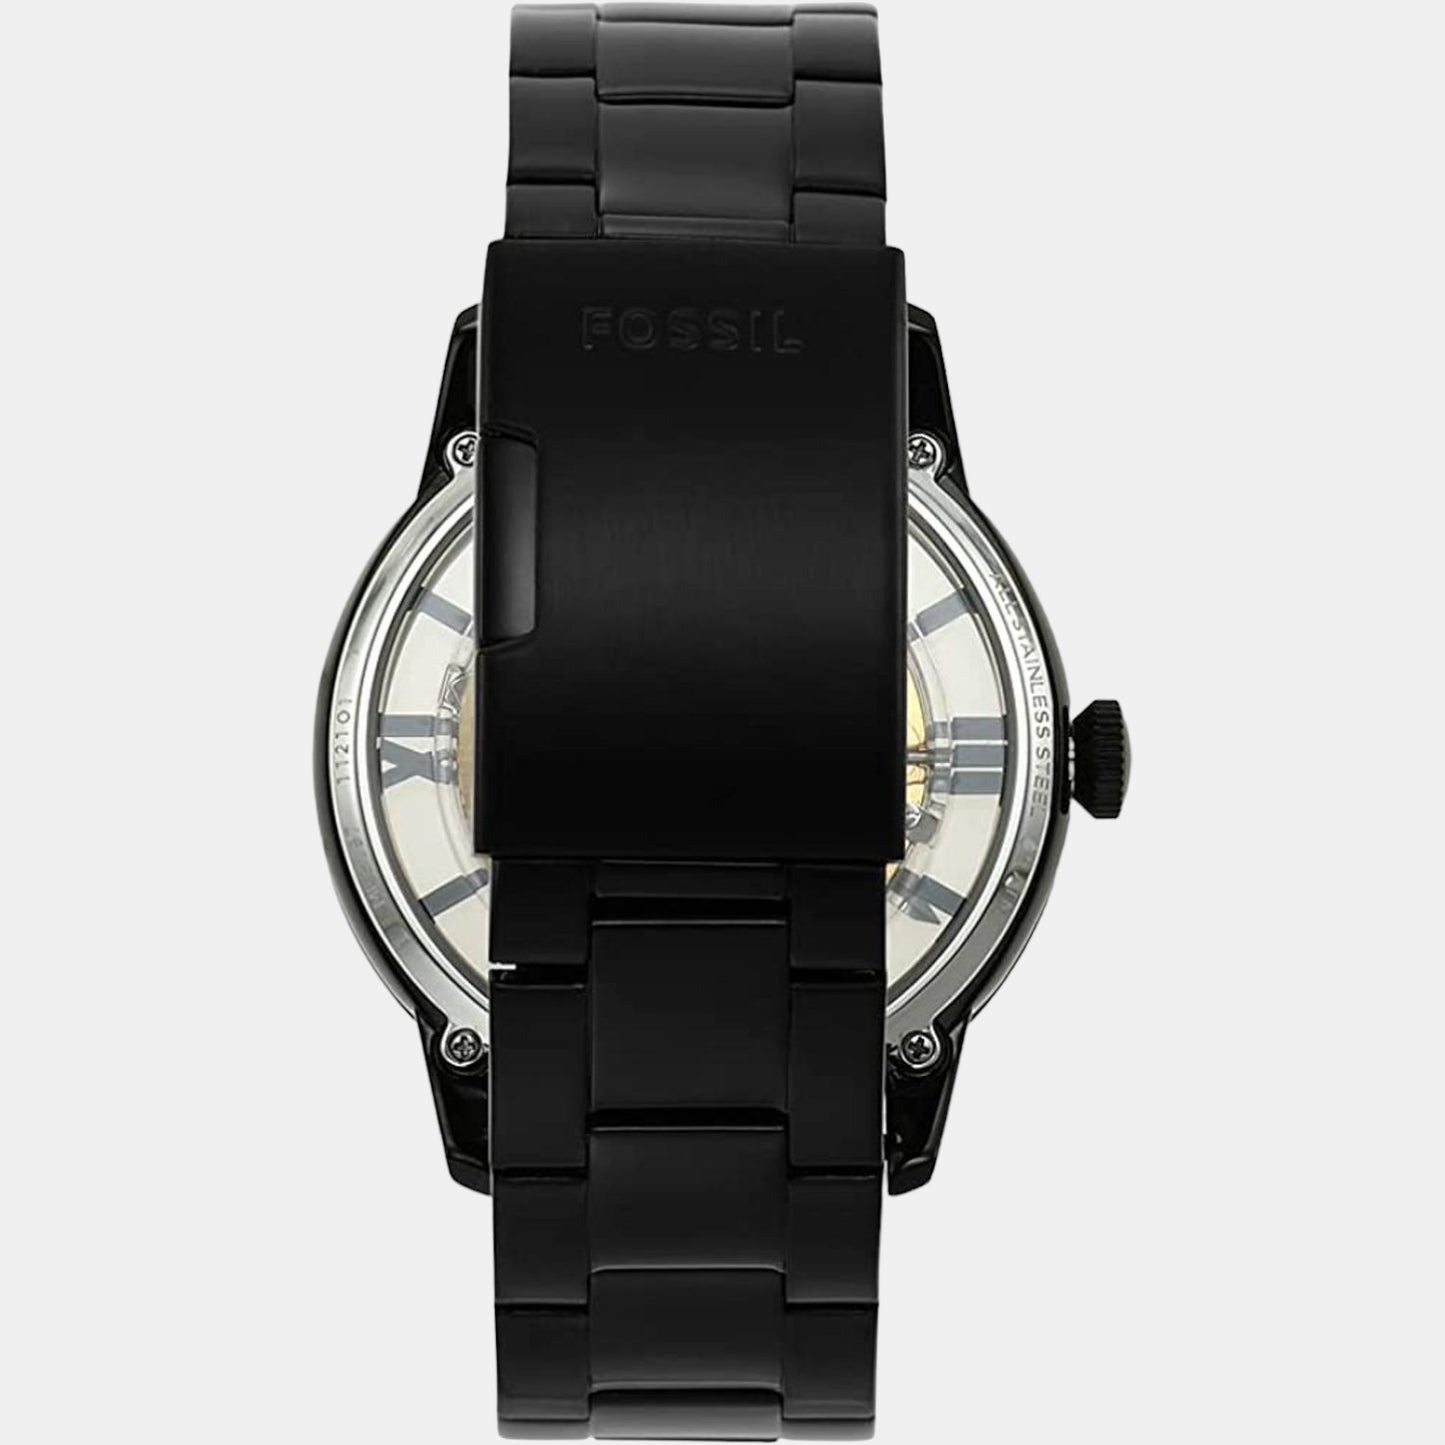 Male Black Analog Stainless Steel Automatic Watch ME3197